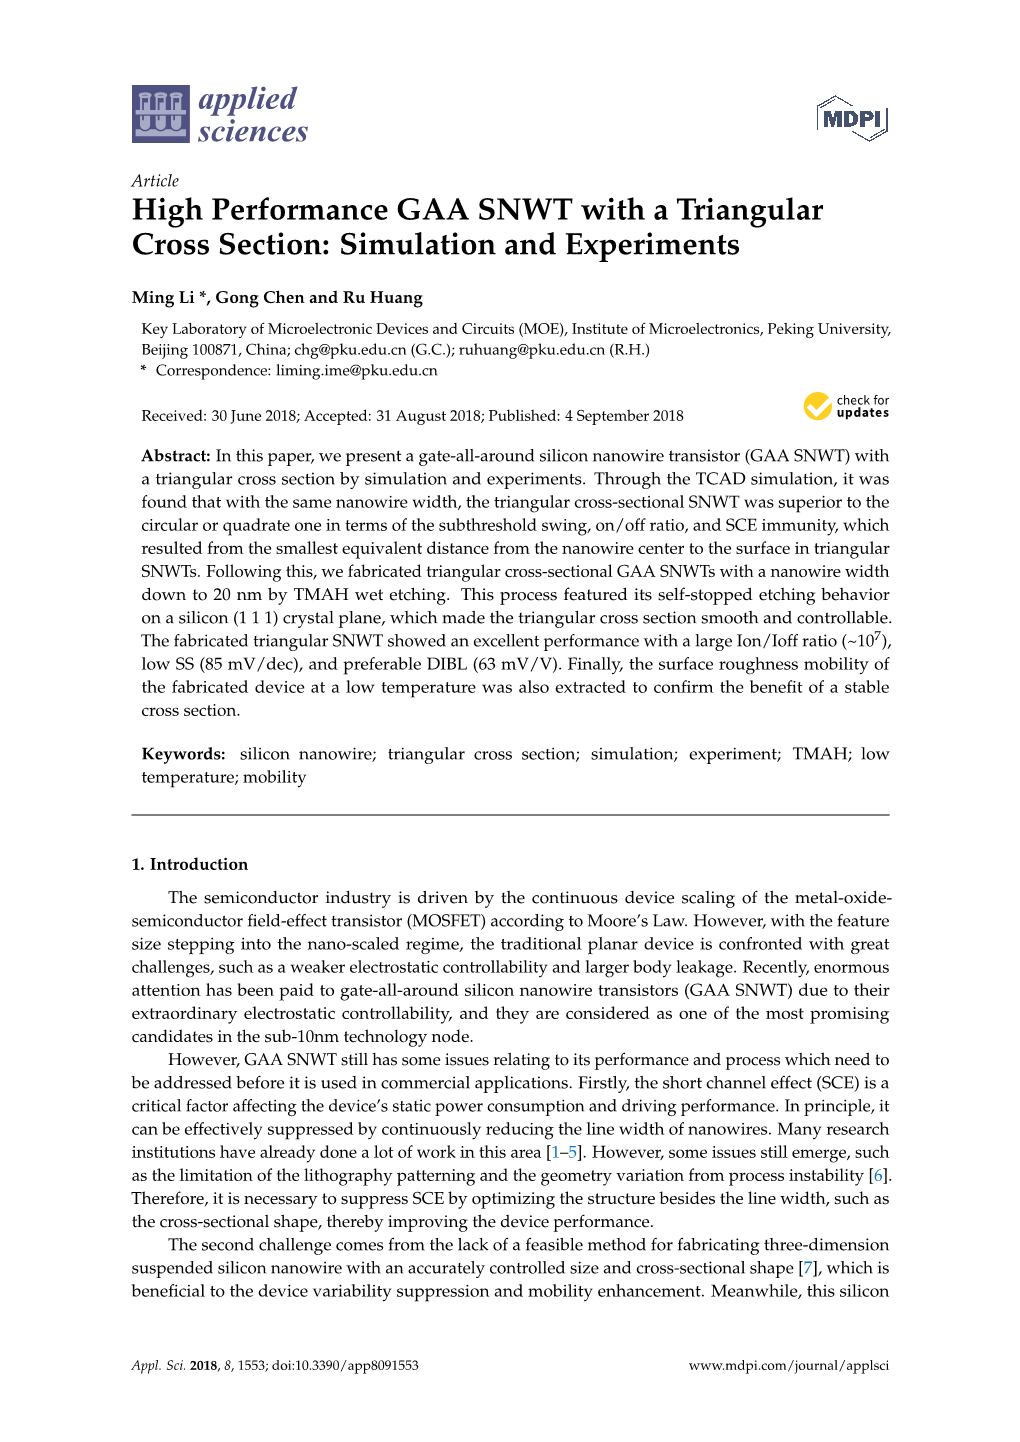 High Performance GAA SNWT with a Triangular Cross Section: Simulation and Experiments